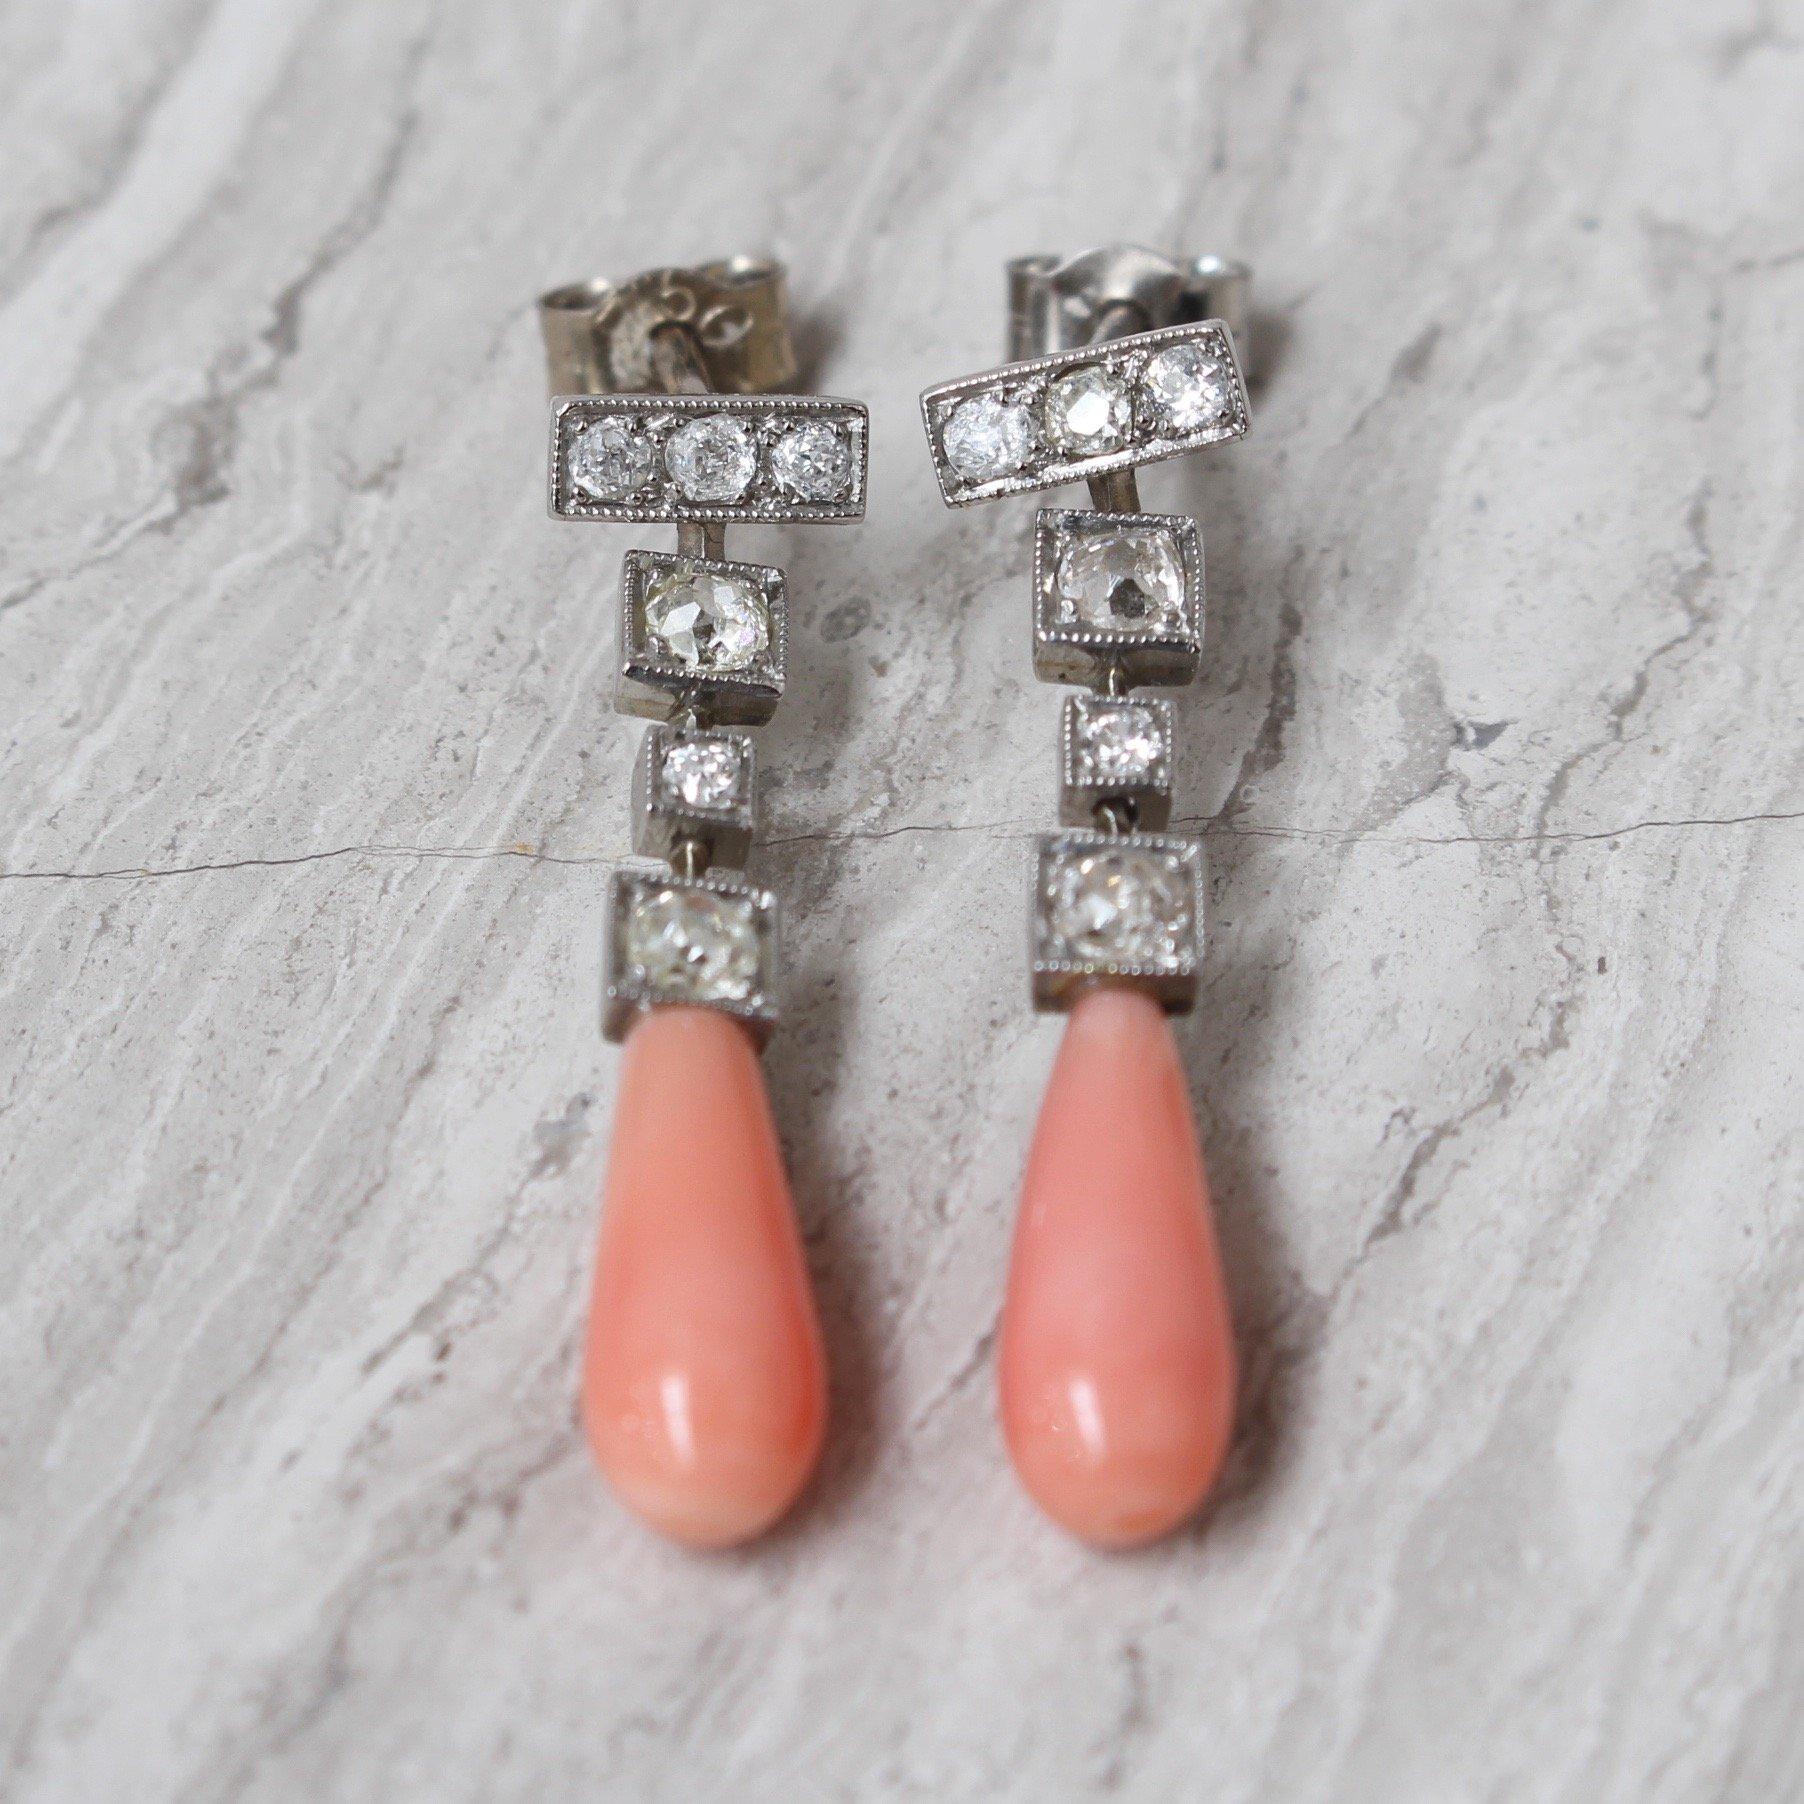 Pair of diamond and coral Art Deco 18-carat white gold earrings (circa 1950s). Art deco was revolutionary at the time it emerged and has withstood the test of time to remain highly fashionable. The trend has proven its longevity and its timeless